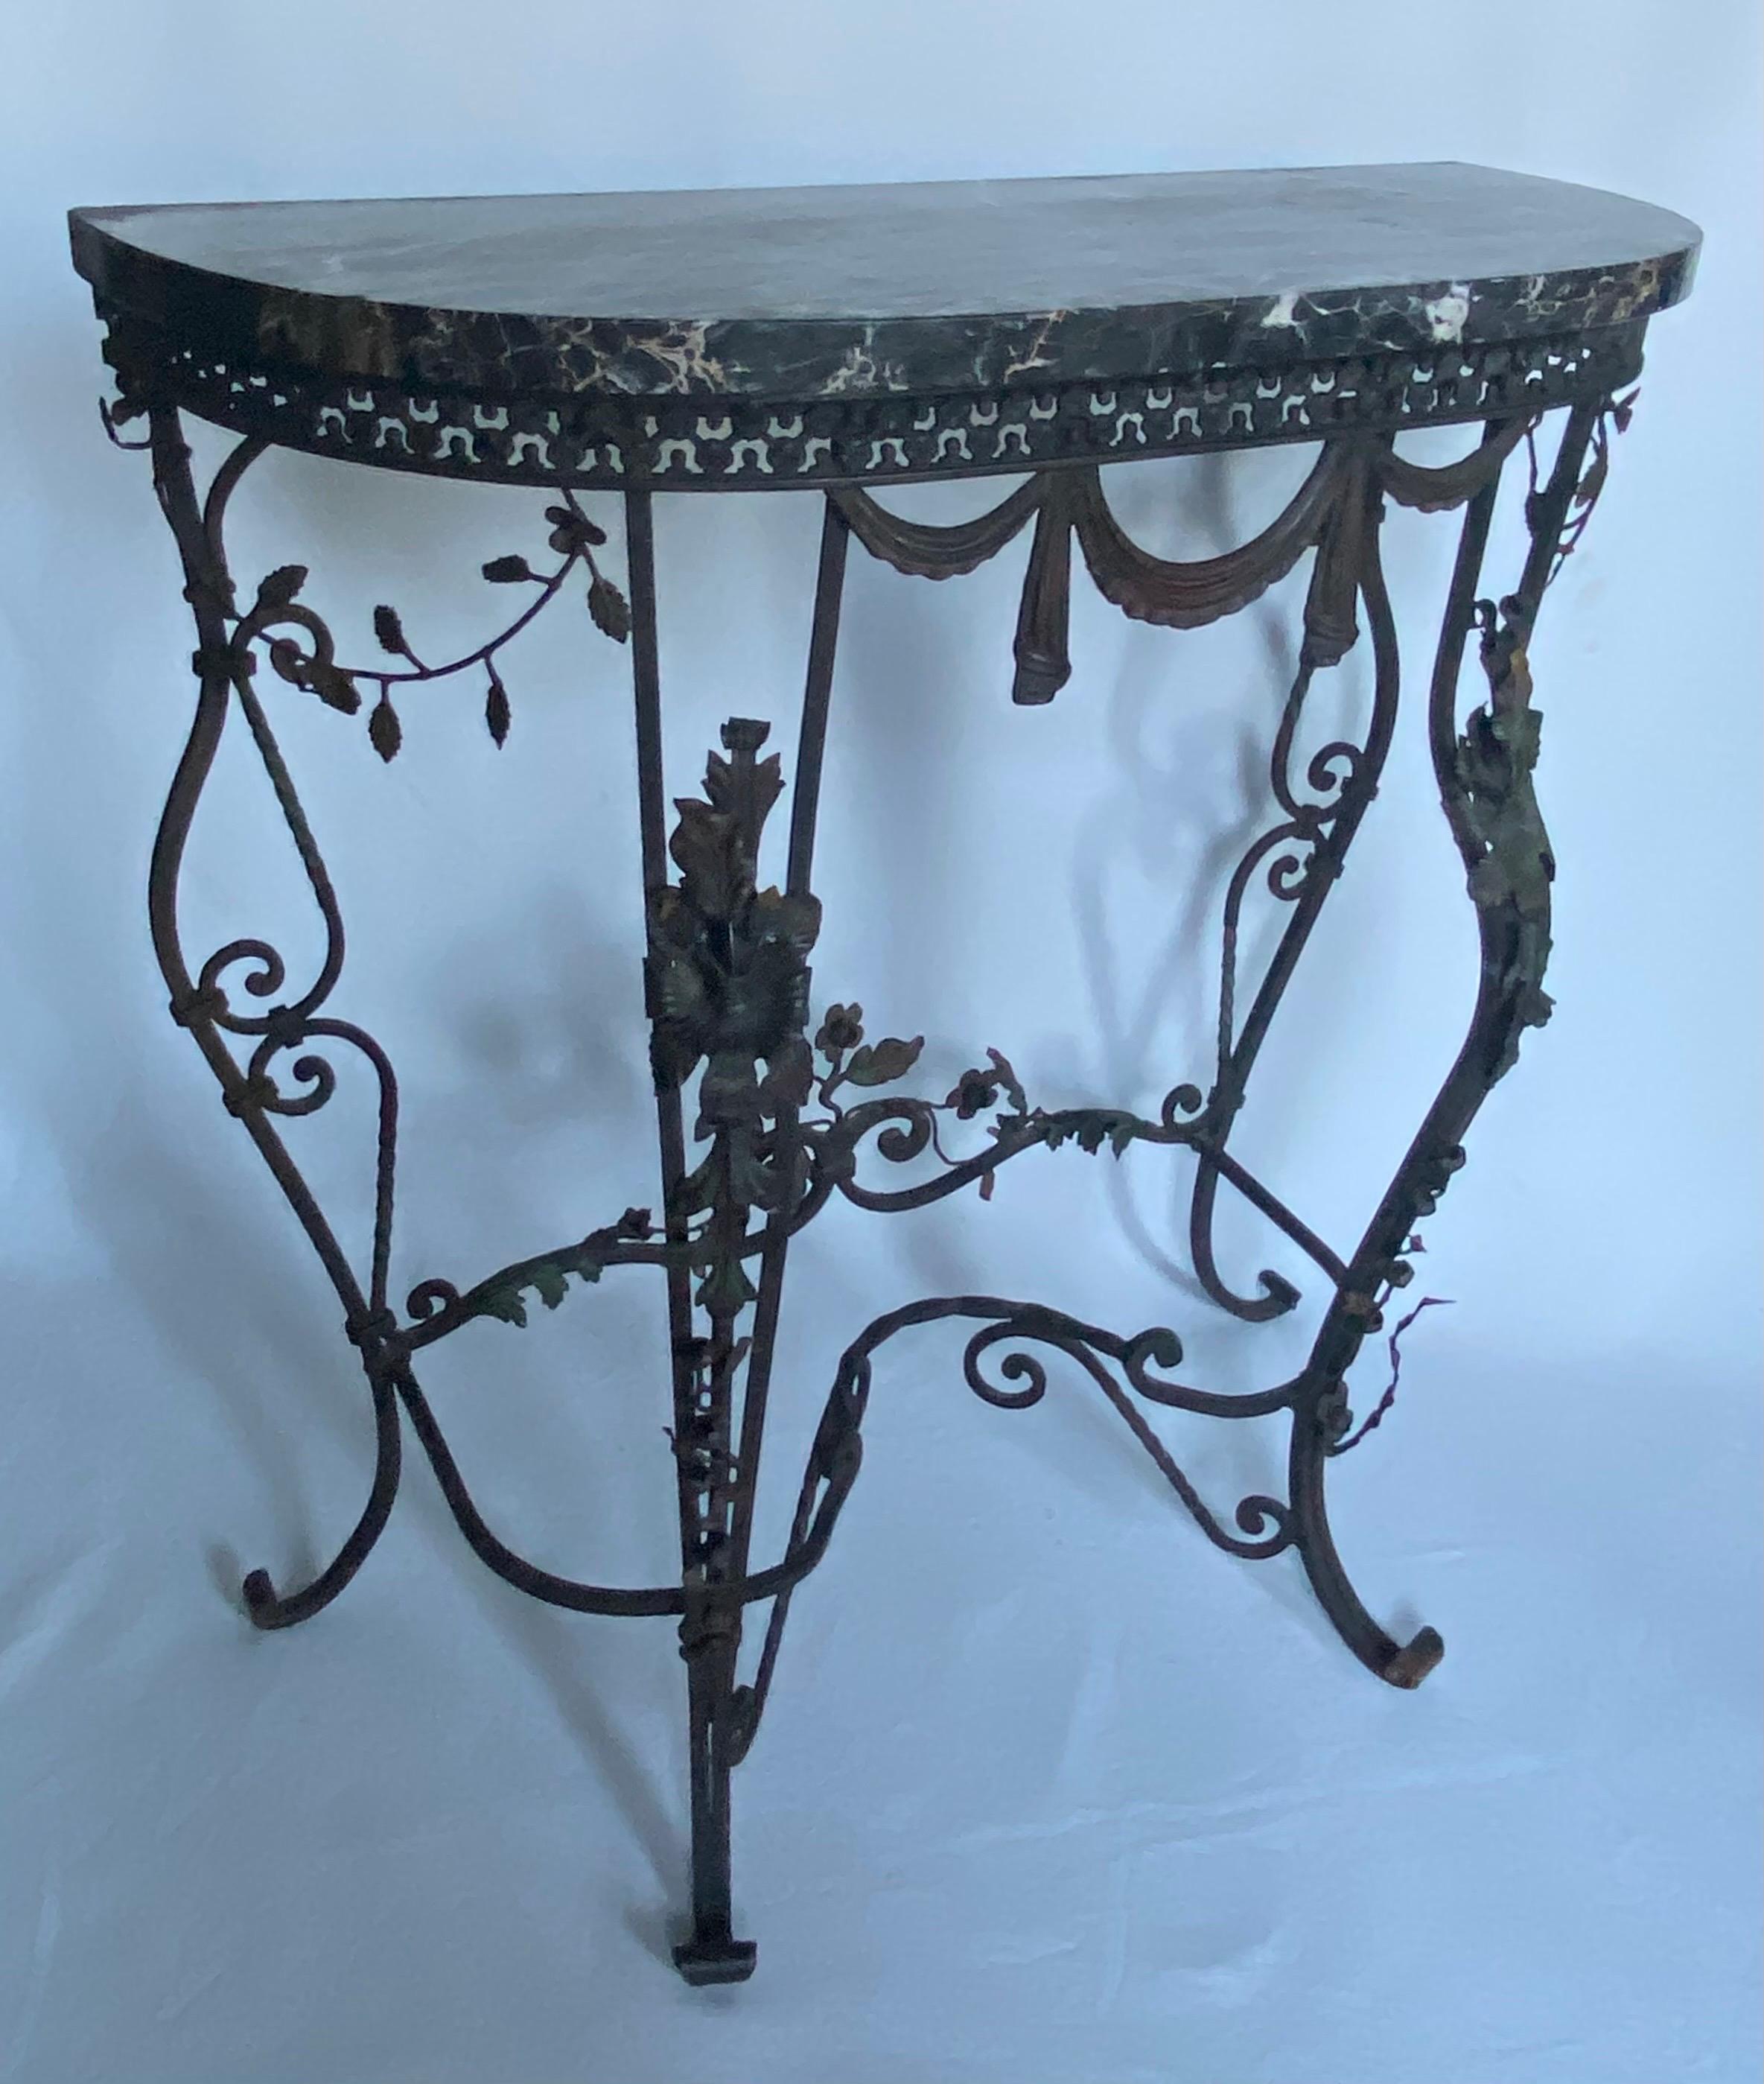 Lovely French wrought iron console table with beautifully veined black marble top. This highly decorated demi-lune shaped table features botanical floral motifs and draped swag garlands. Quality craftsmanship and style perfect for any interior space